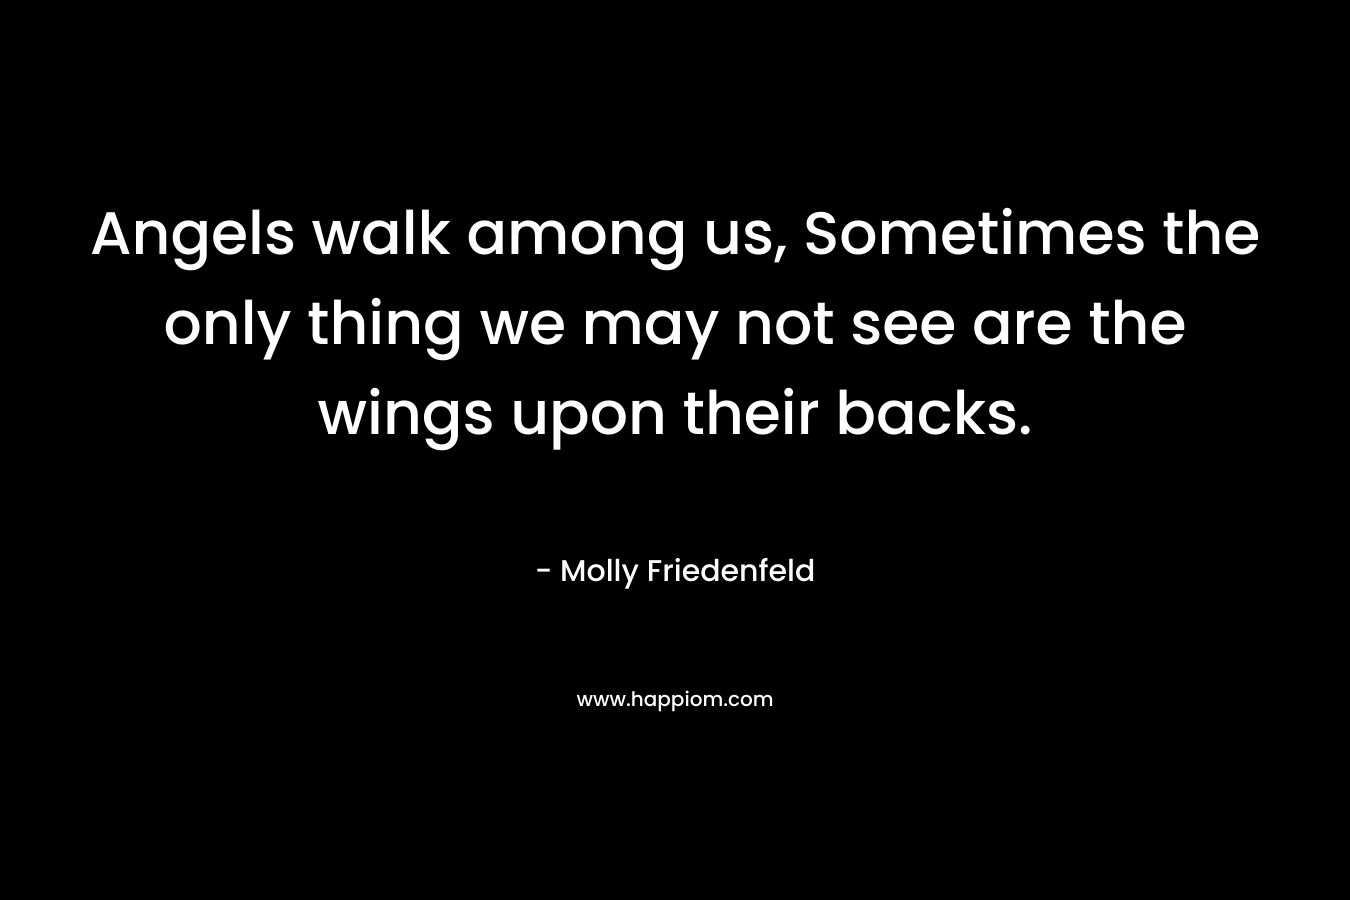 Angels walk among us, Sometimes the only thing we may not see are the wings upon their backs. – Molly Friedenfeld